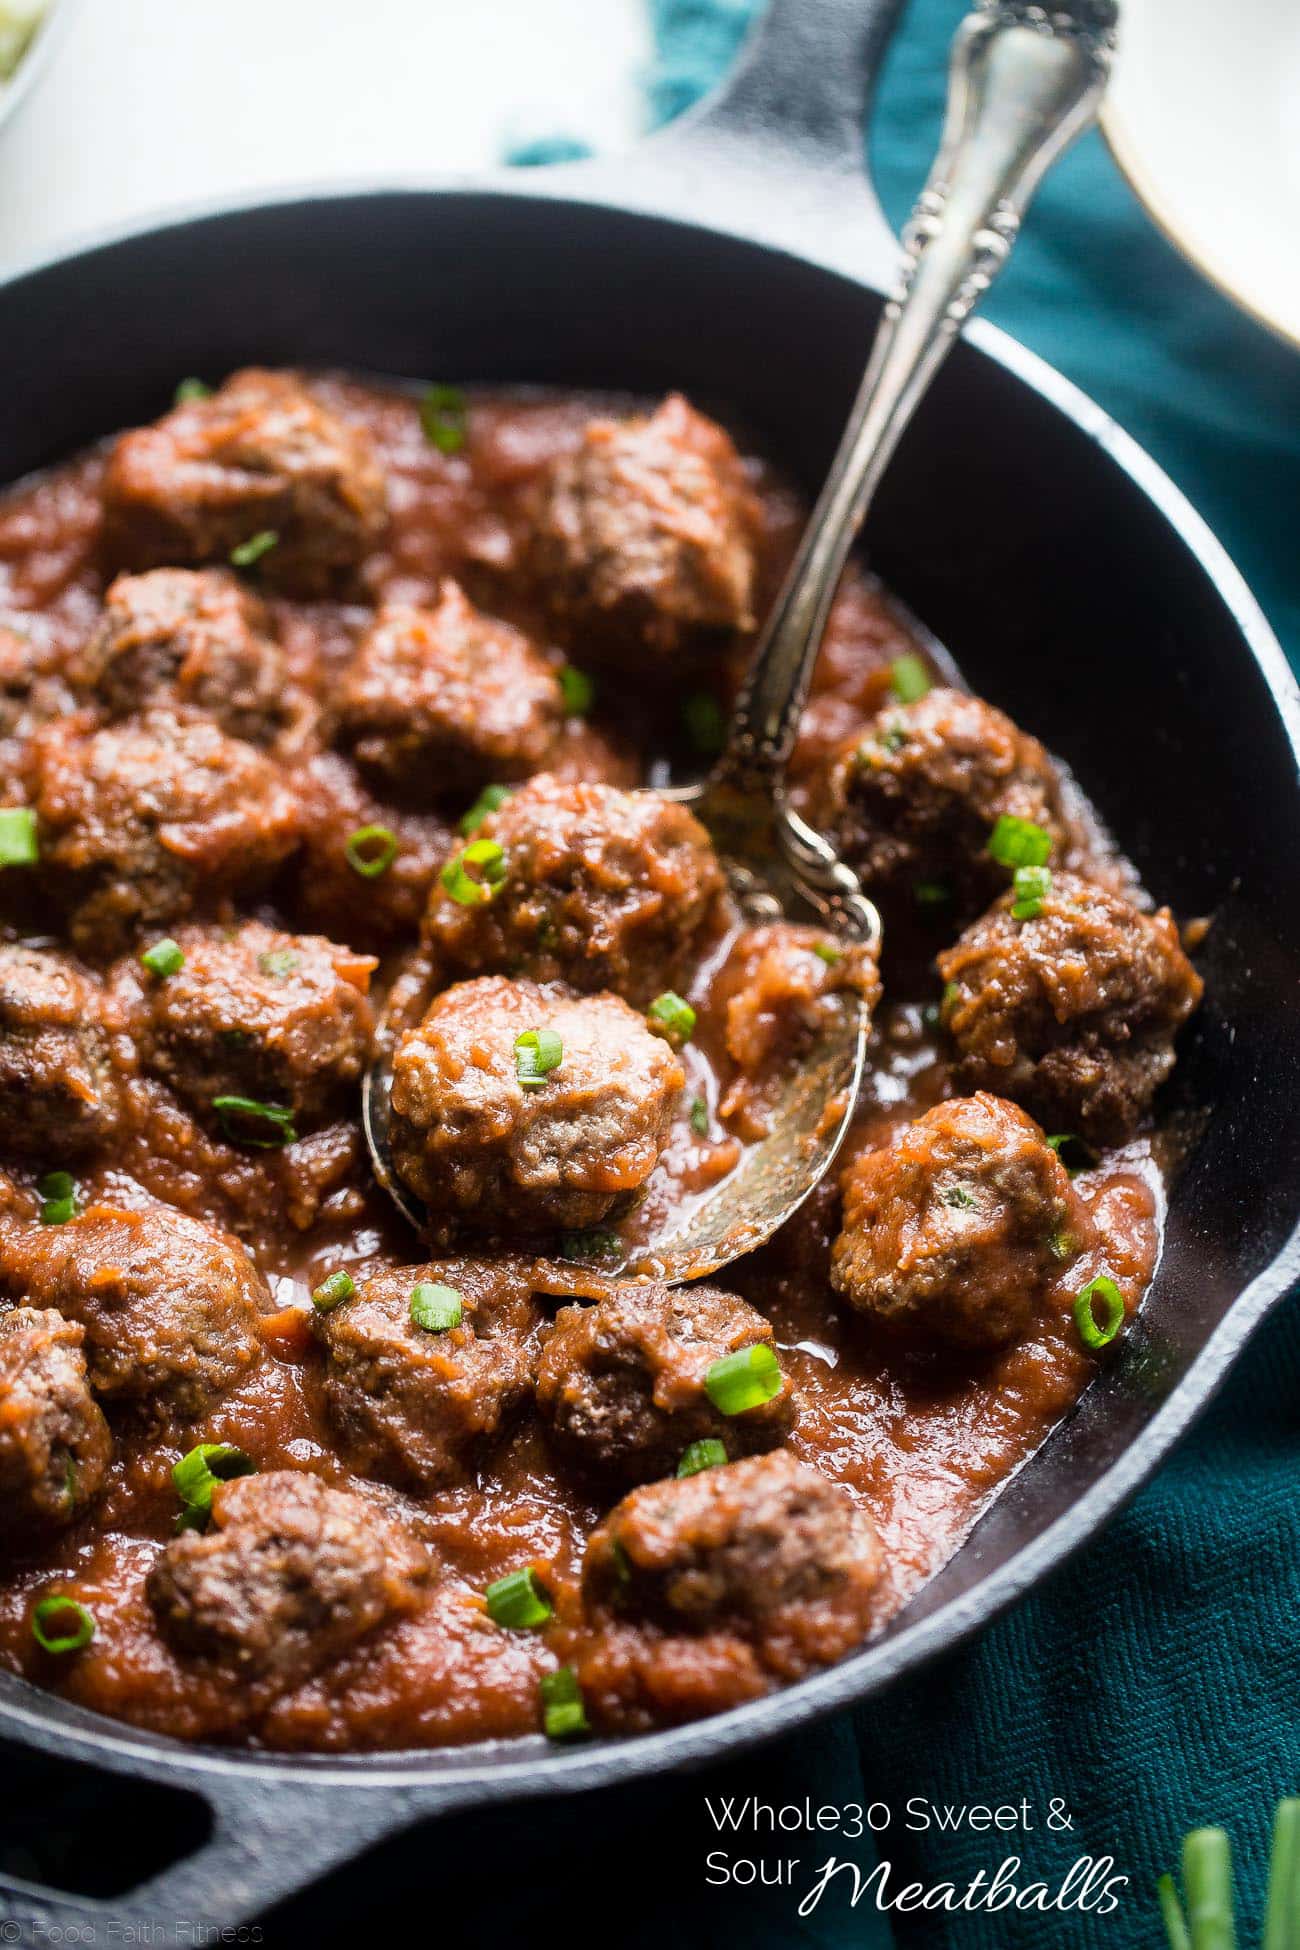 Whole30 Sweet and Sour Meatballs - These easy paleo meatballs are a healthy remake of a classic recipe that is gluten free and whole30 complaint! They're a weeknight meal that everyone will love! | Foodfaithfitness.com | @FoodFaithFit